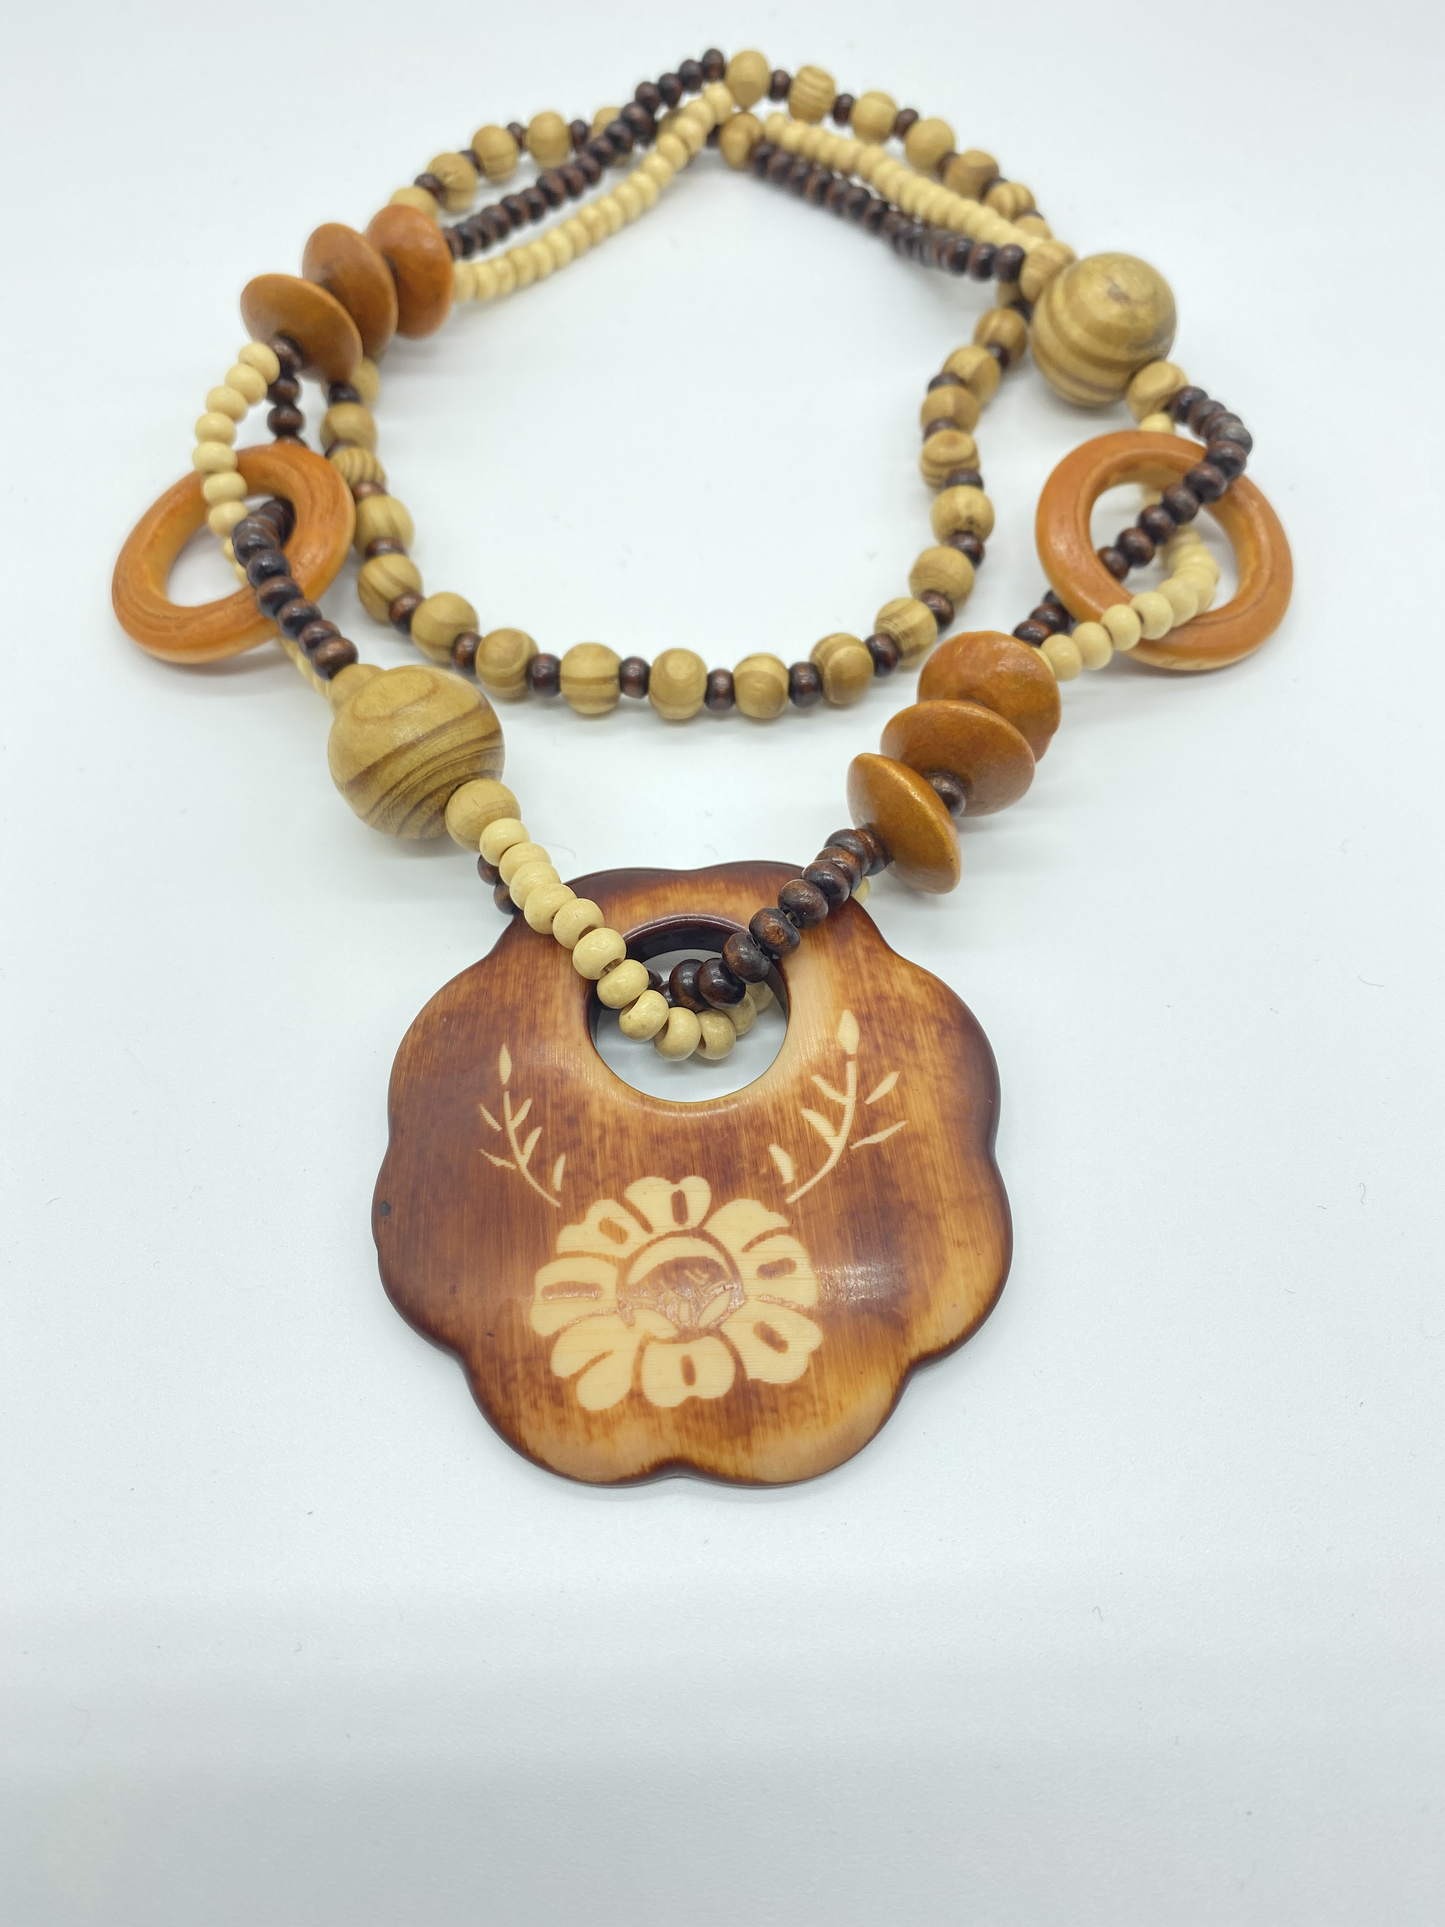 Wooden Crafted Necklace